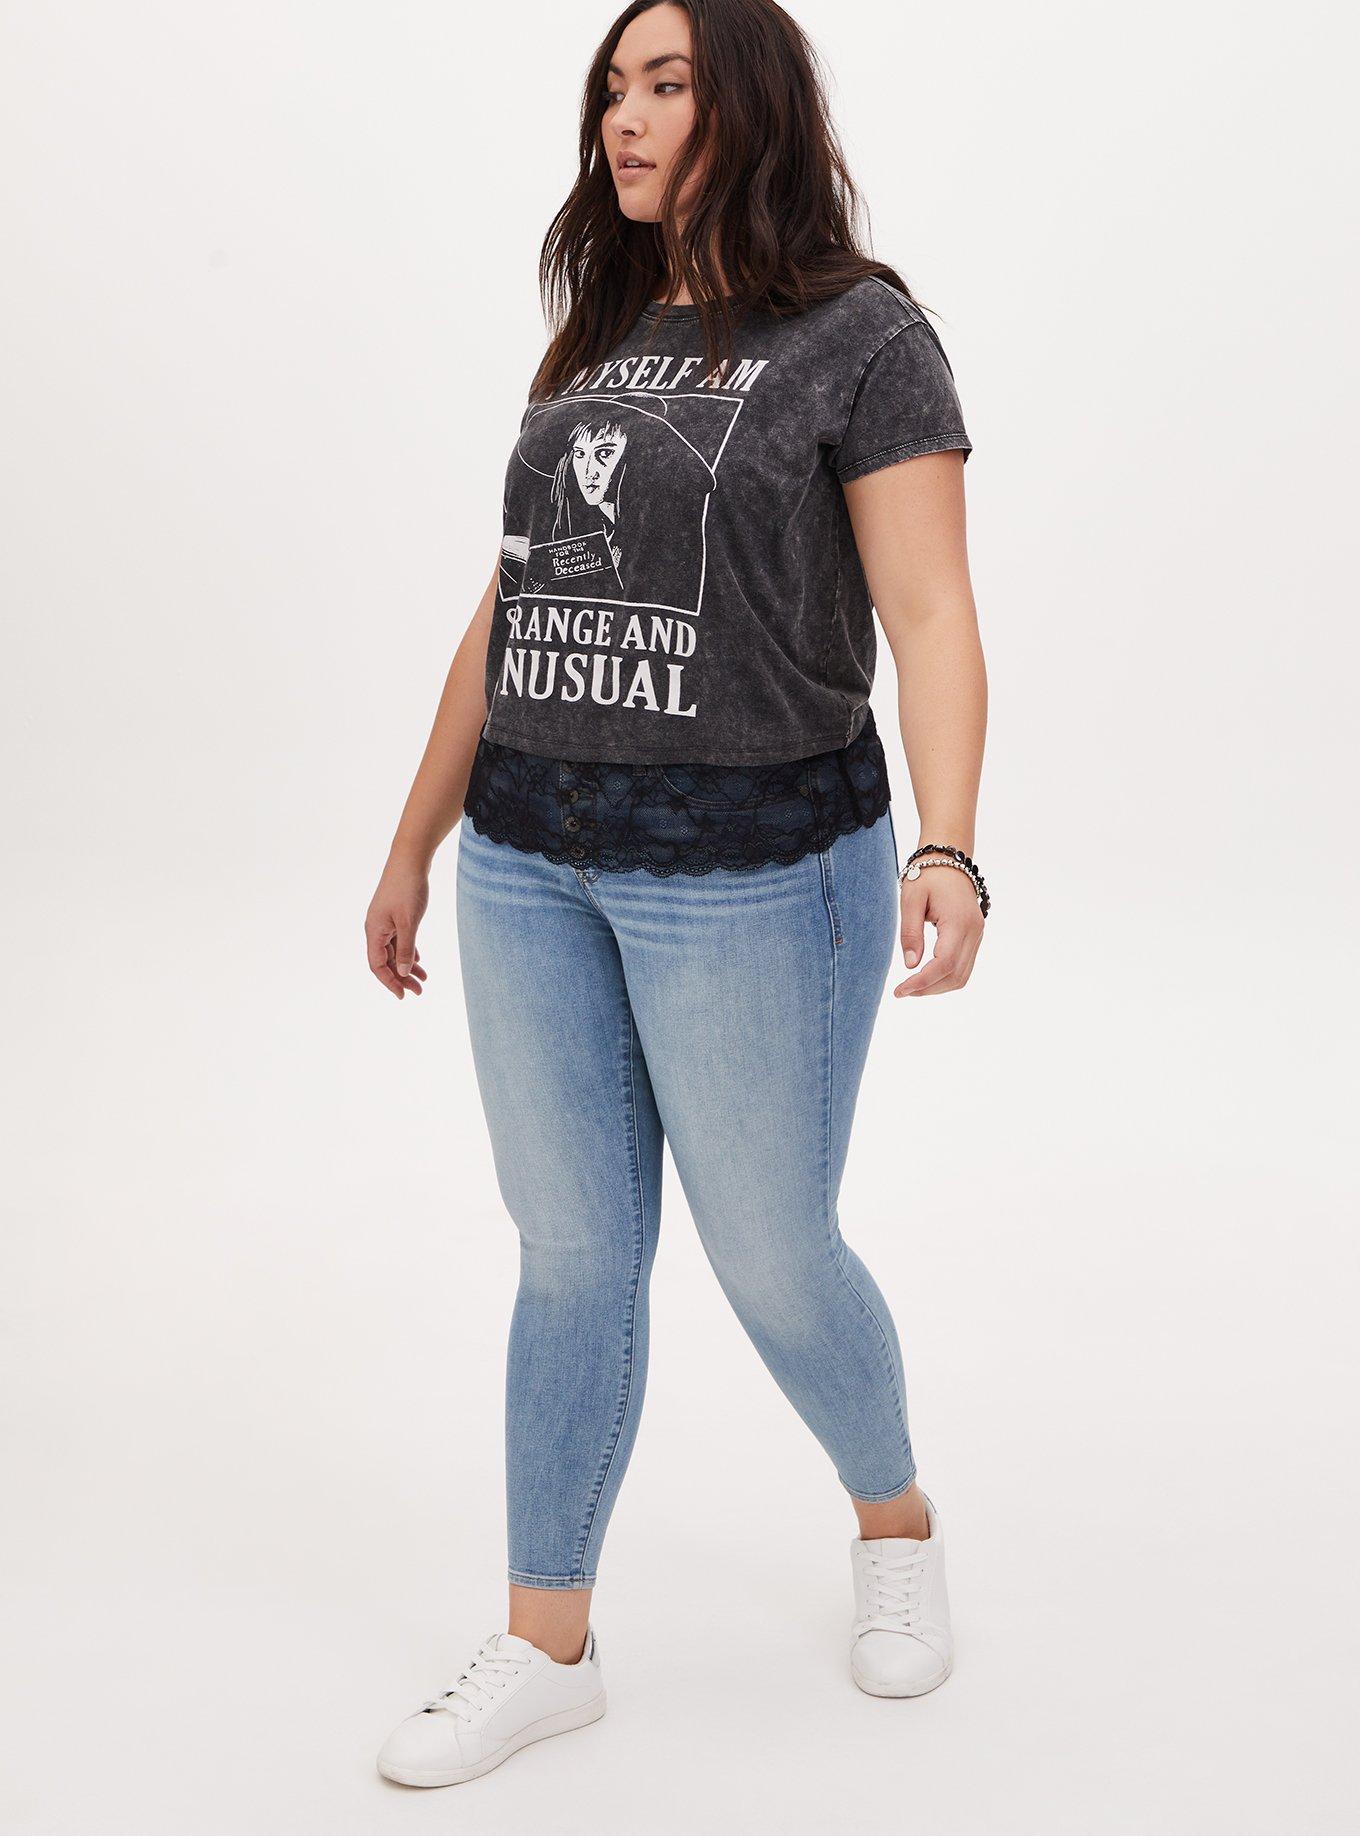 Torrid - It's the little extra details on our tops - like these